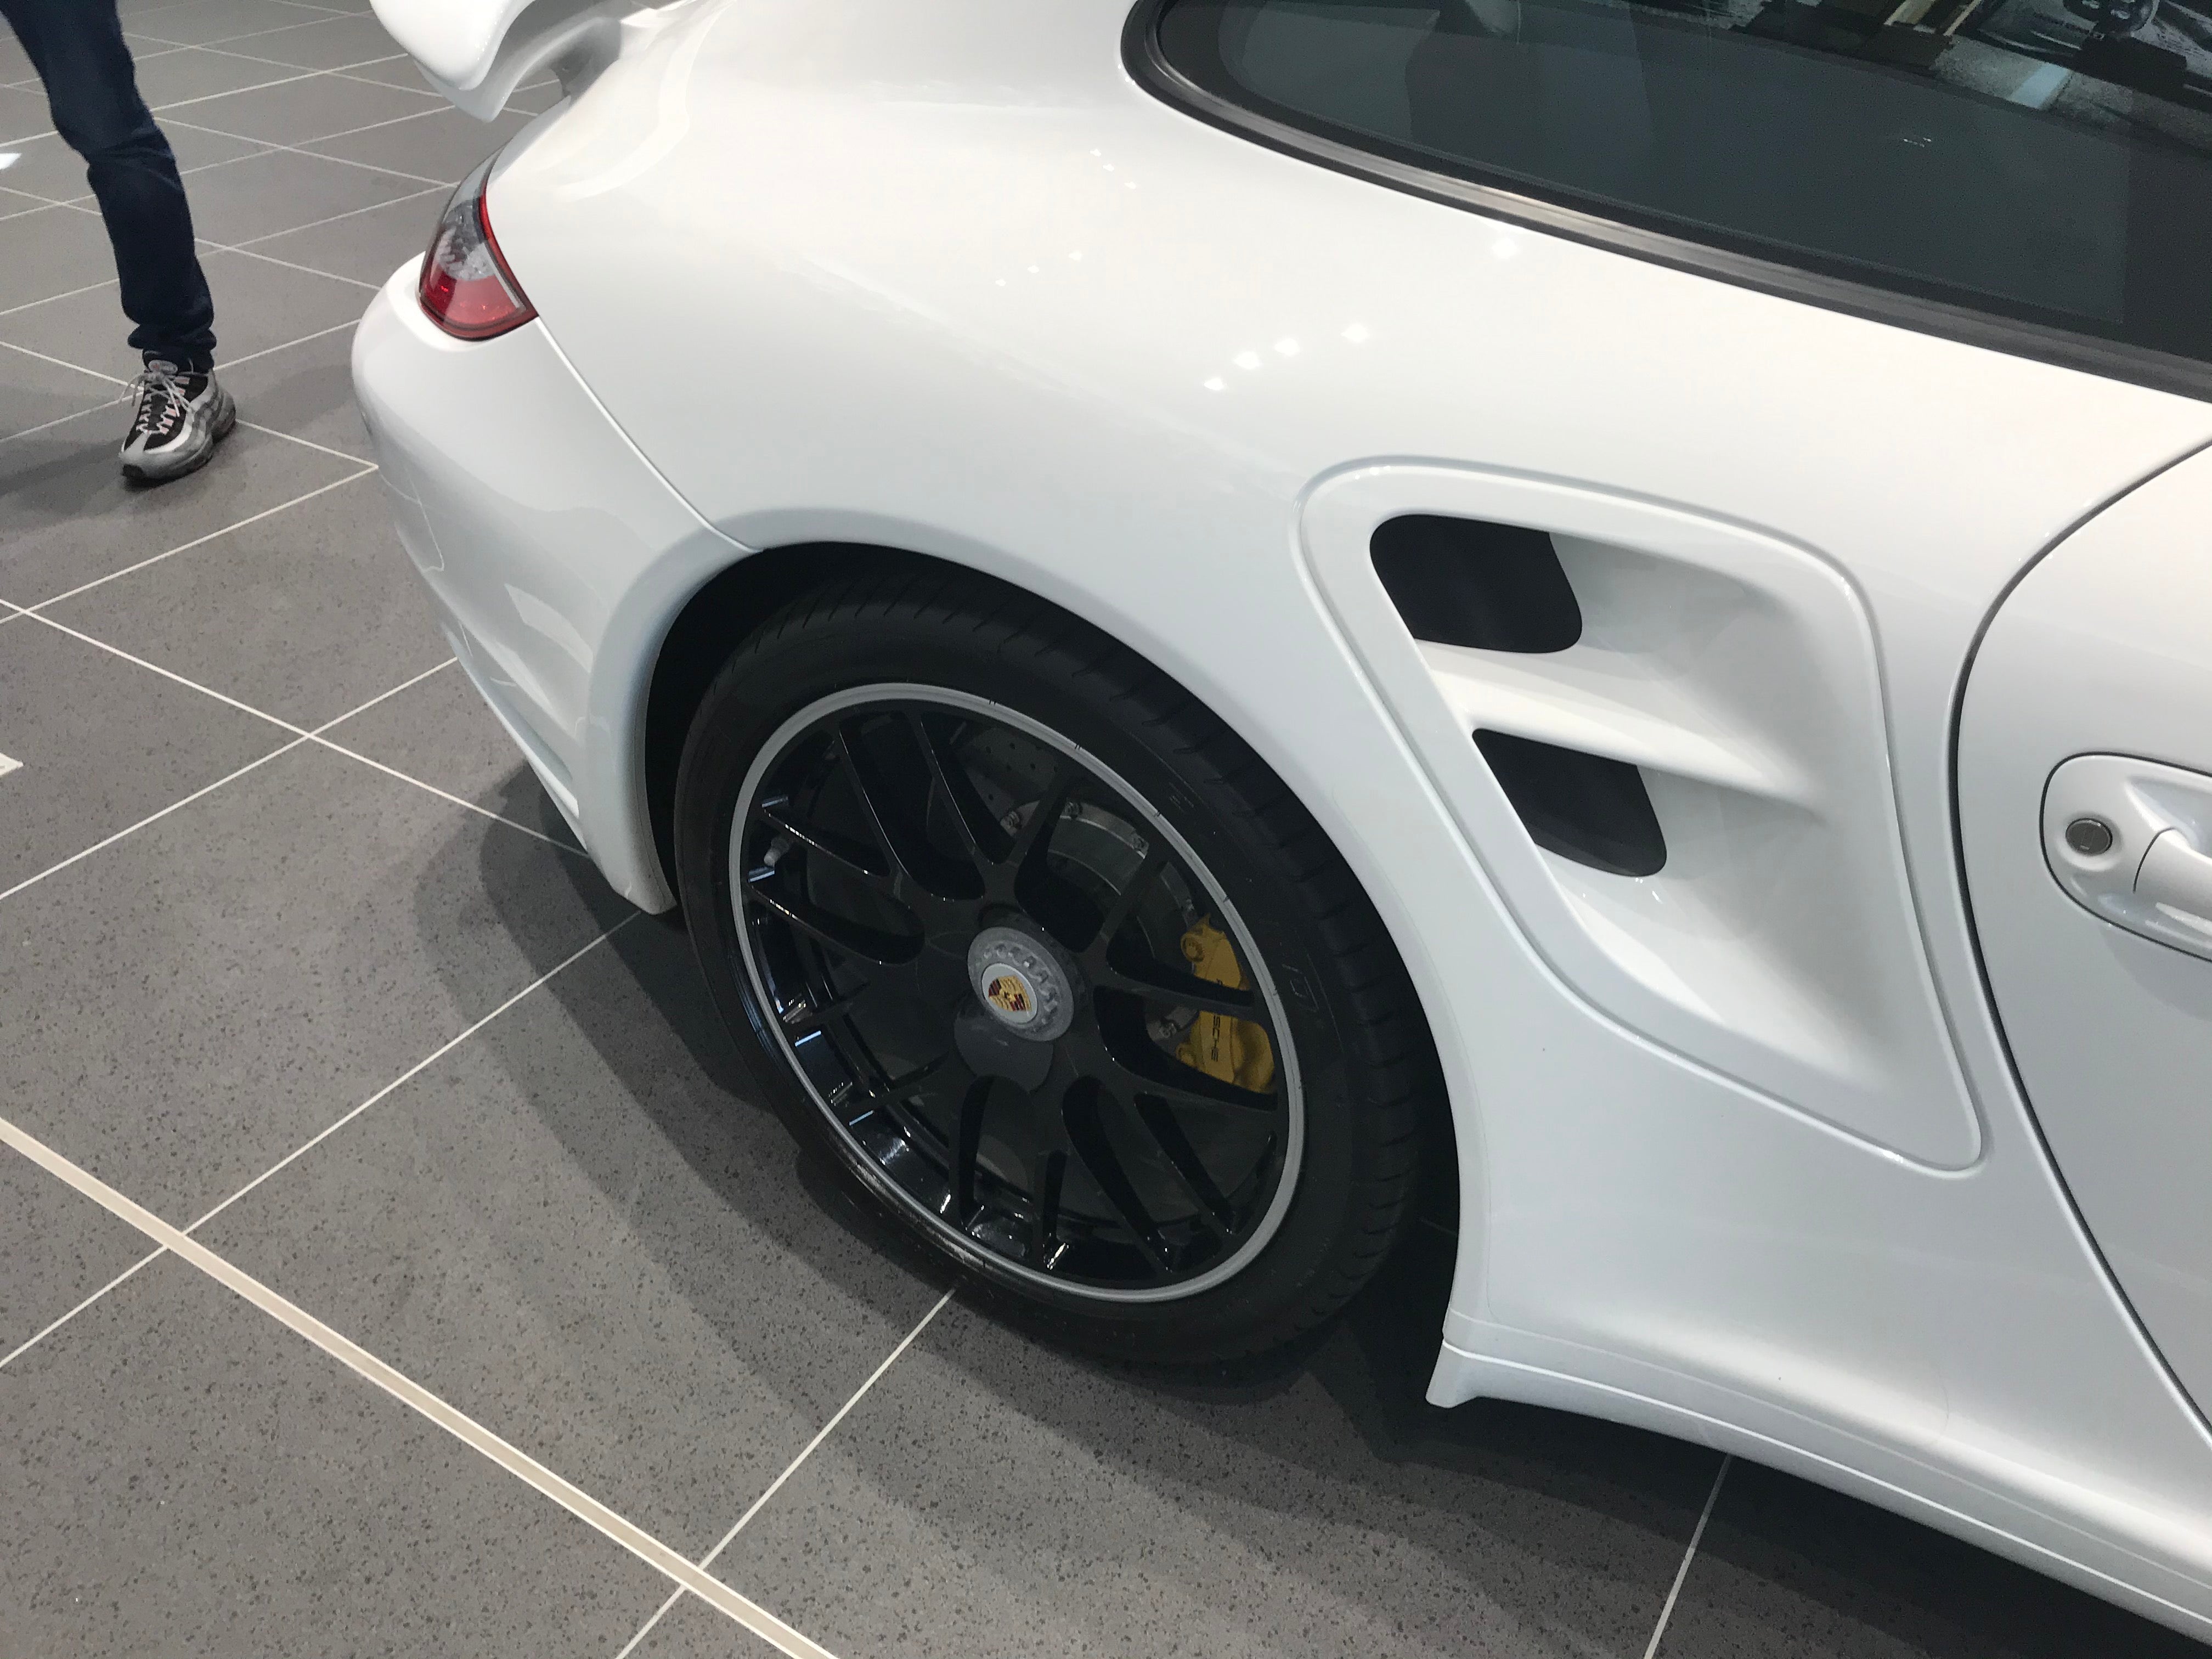 Porsche 911 Type 997 Turbo S Coupe For Sale